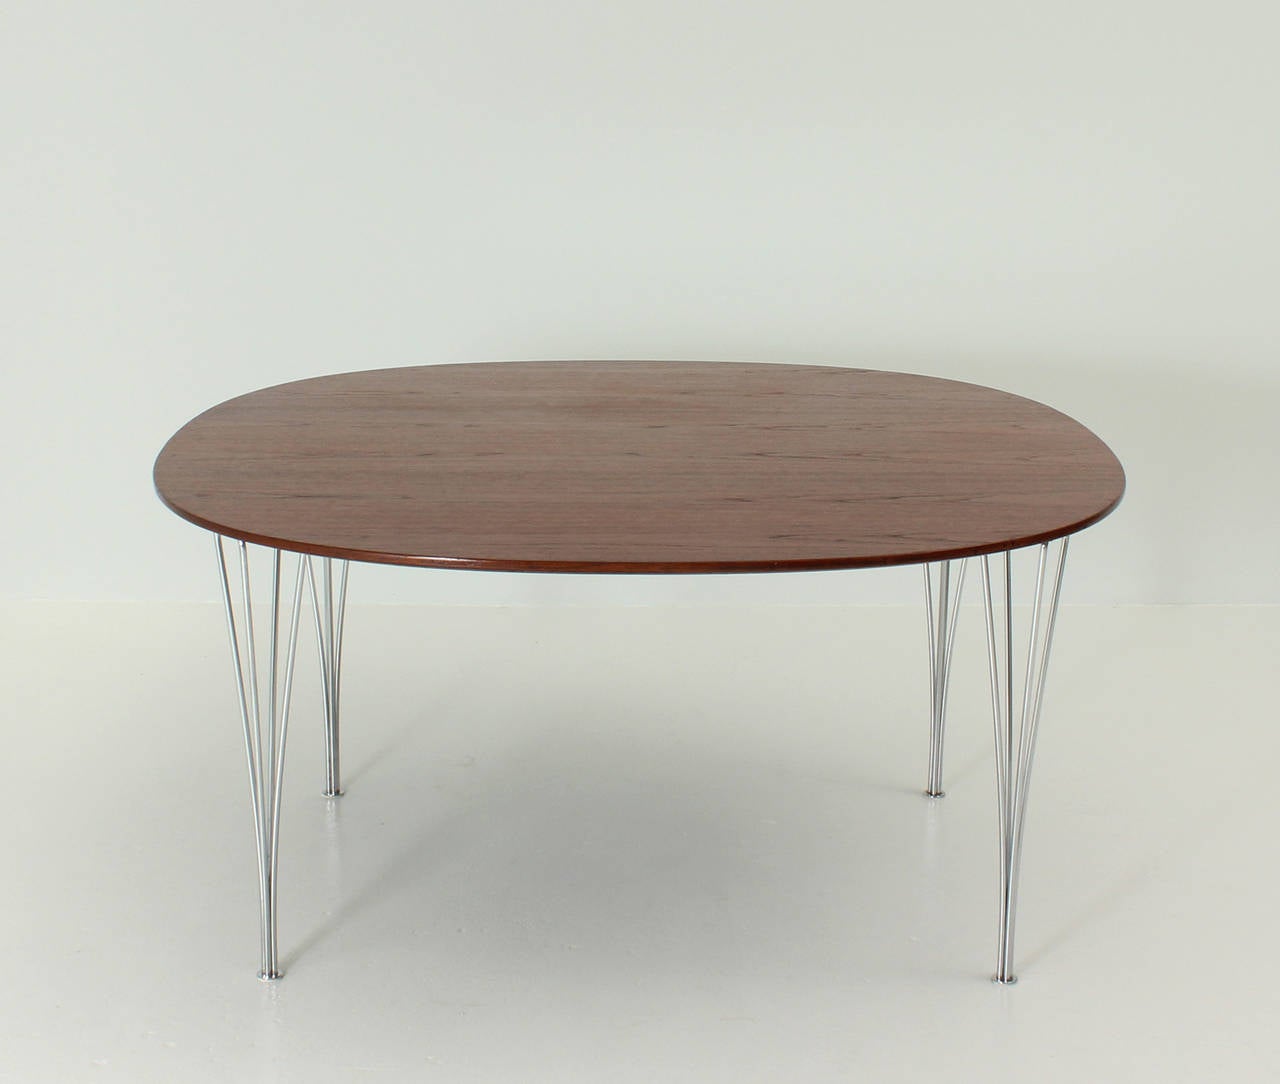 Rare Supercircle table in teak wood designed in 1965 by Bruno Mathsson and Piet Hein for Fritz Hansen, Denmark.